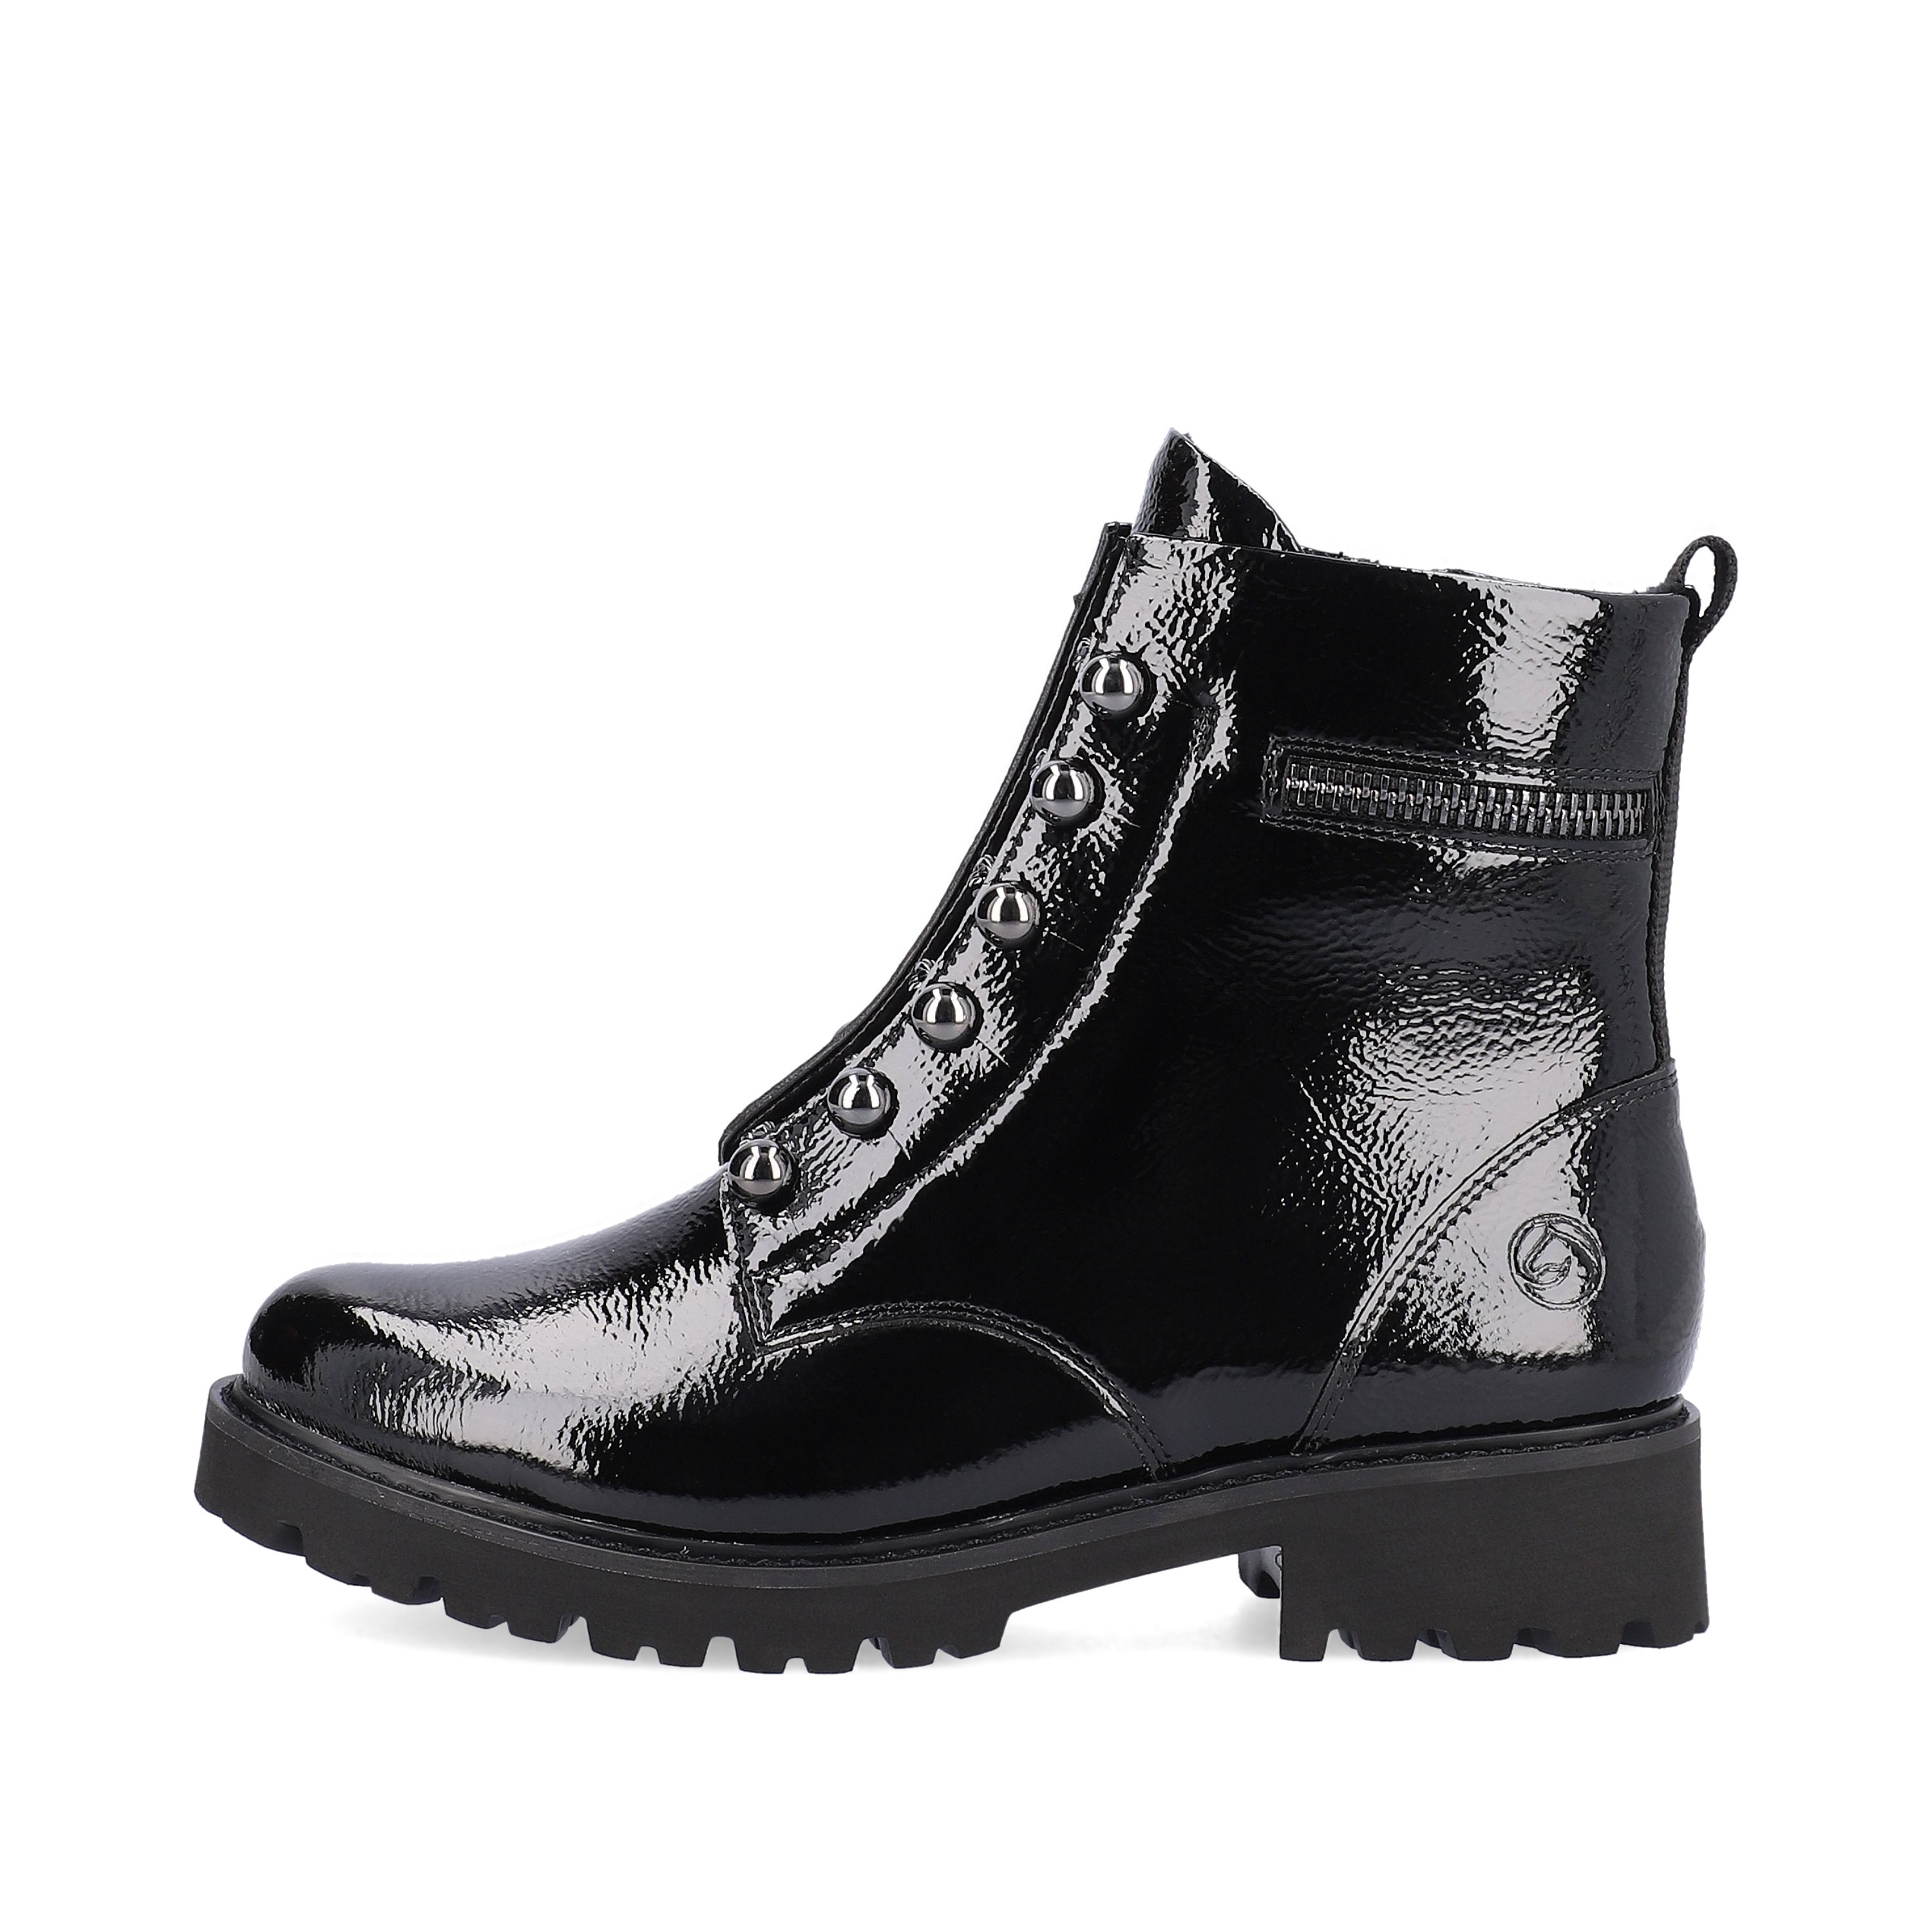 Glossy black remonte women´s biker boots D8670-03 with especially light sole. The outside of the shoe